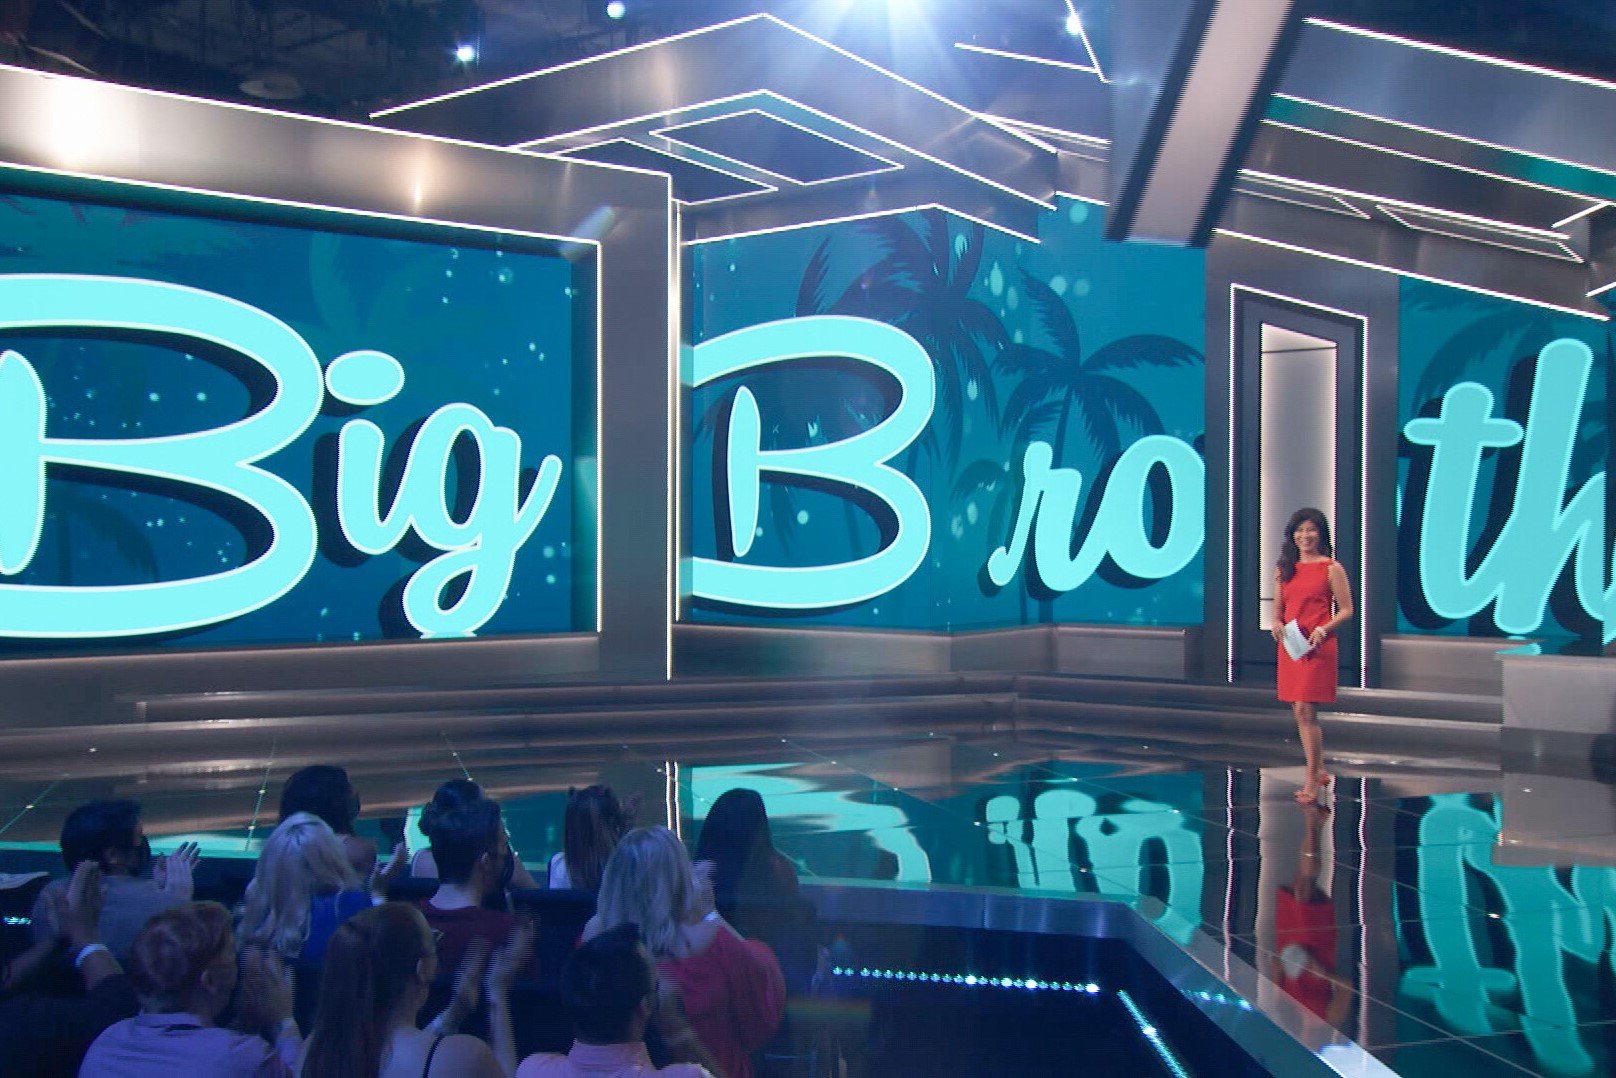 Julie Chen Moonves stands on the 'Big Brother' stage in a red dress. Casting for 'Big Brother' Season 25 opens on Monday, Feb. 13.